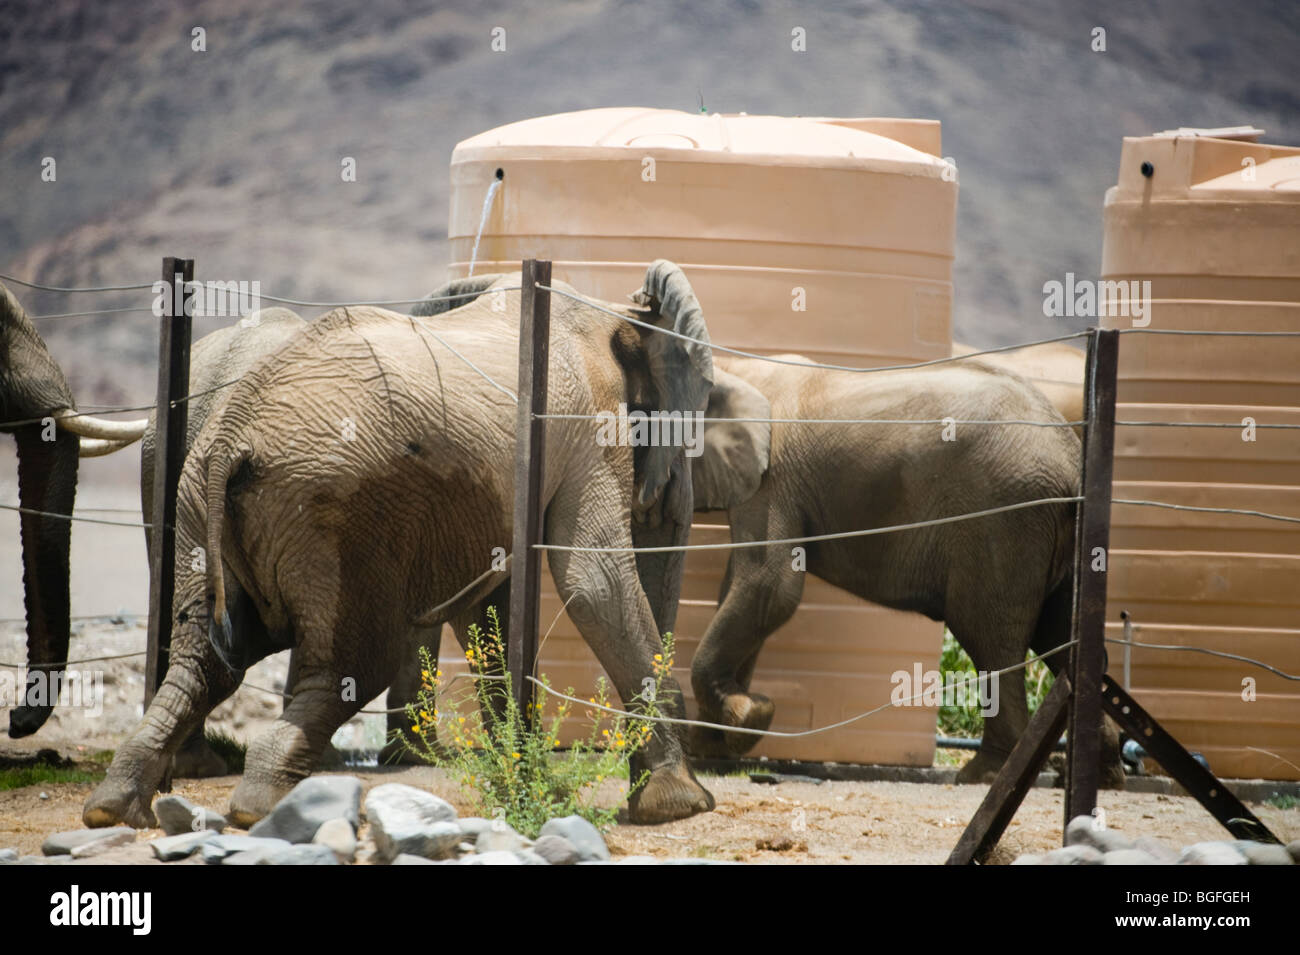 Desert adapted elephants 'stealing' water from the President's bore-hole storage tanks, Hoanib, Namibia. Stock Photo